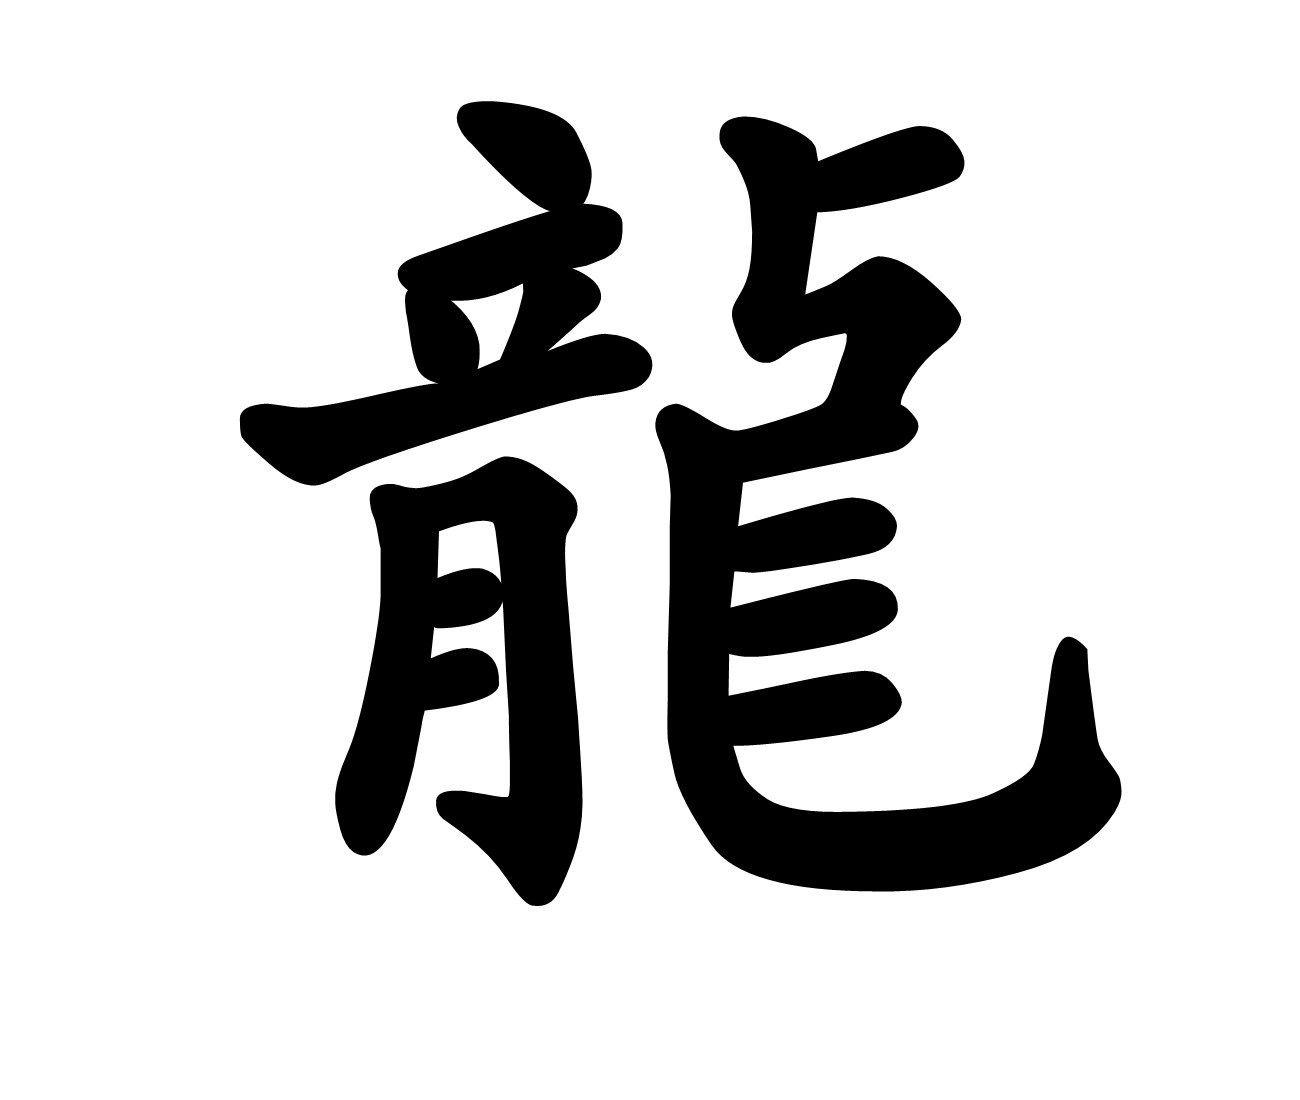 Customize your Chinese Symbols, Chinese Words, Chinese Characters 